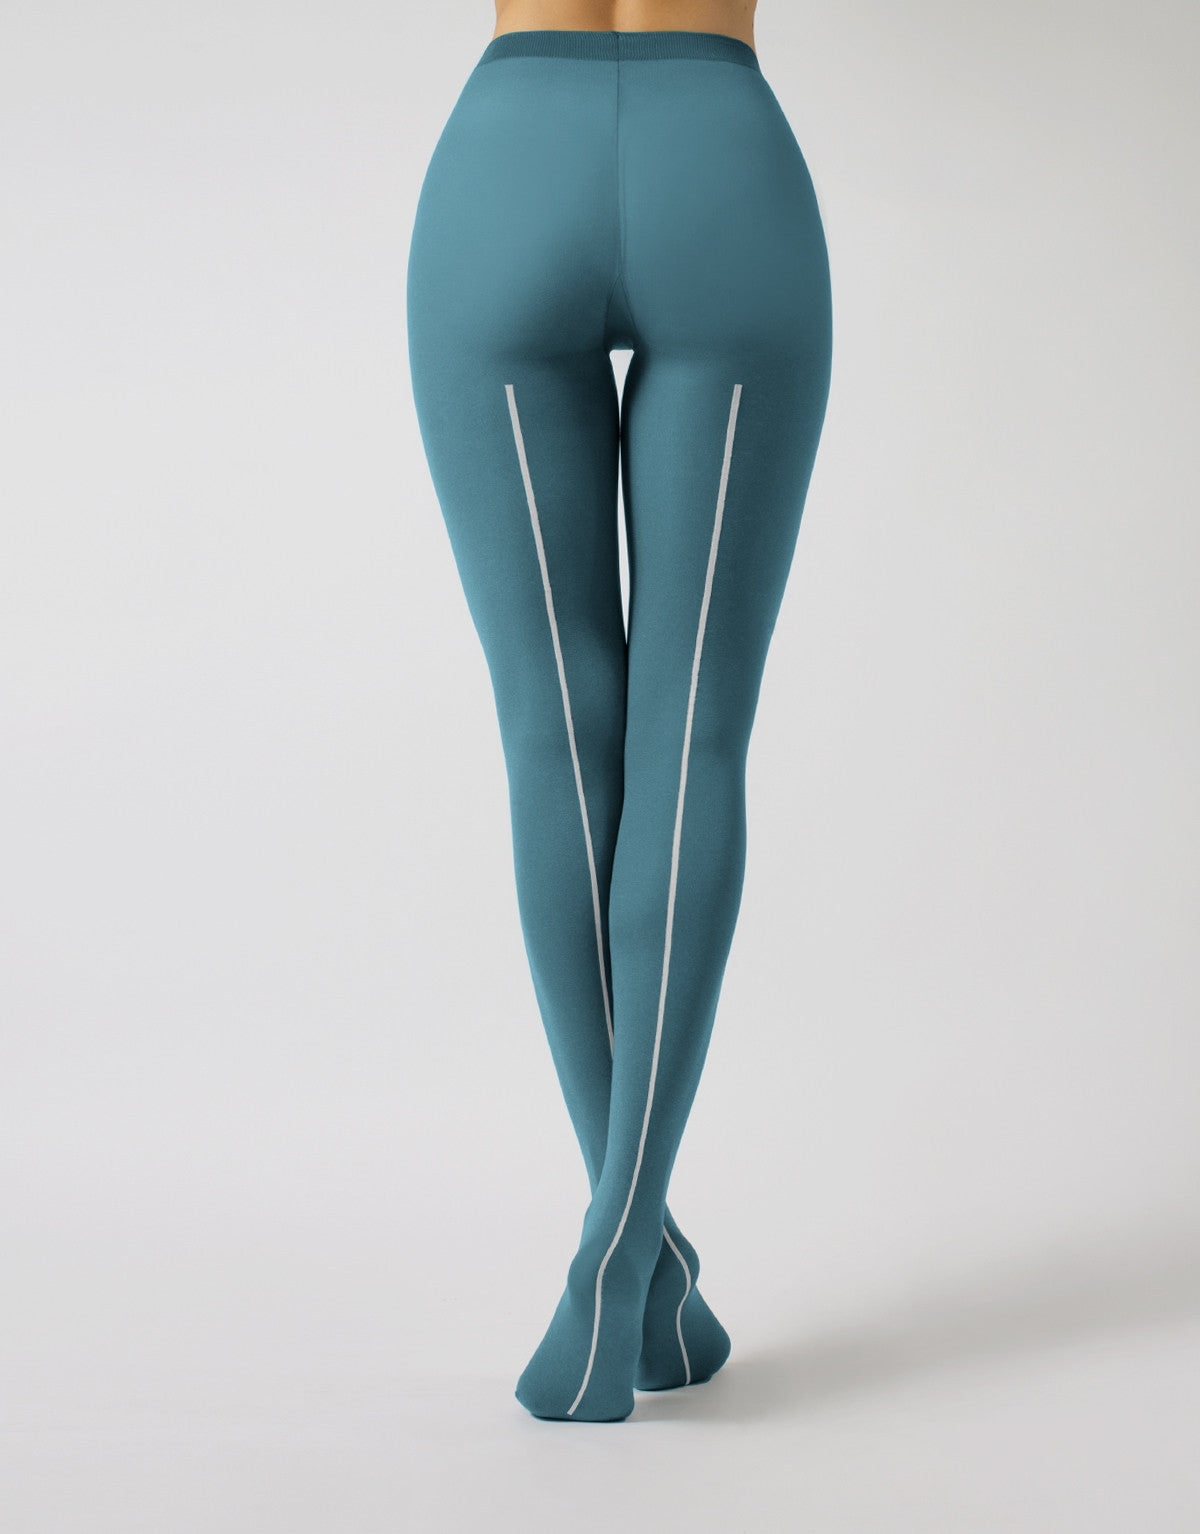 Calzitaly Melange Seam Tights - Teal blue opaque fashion tights with a knitted fleck effect, white back seam.